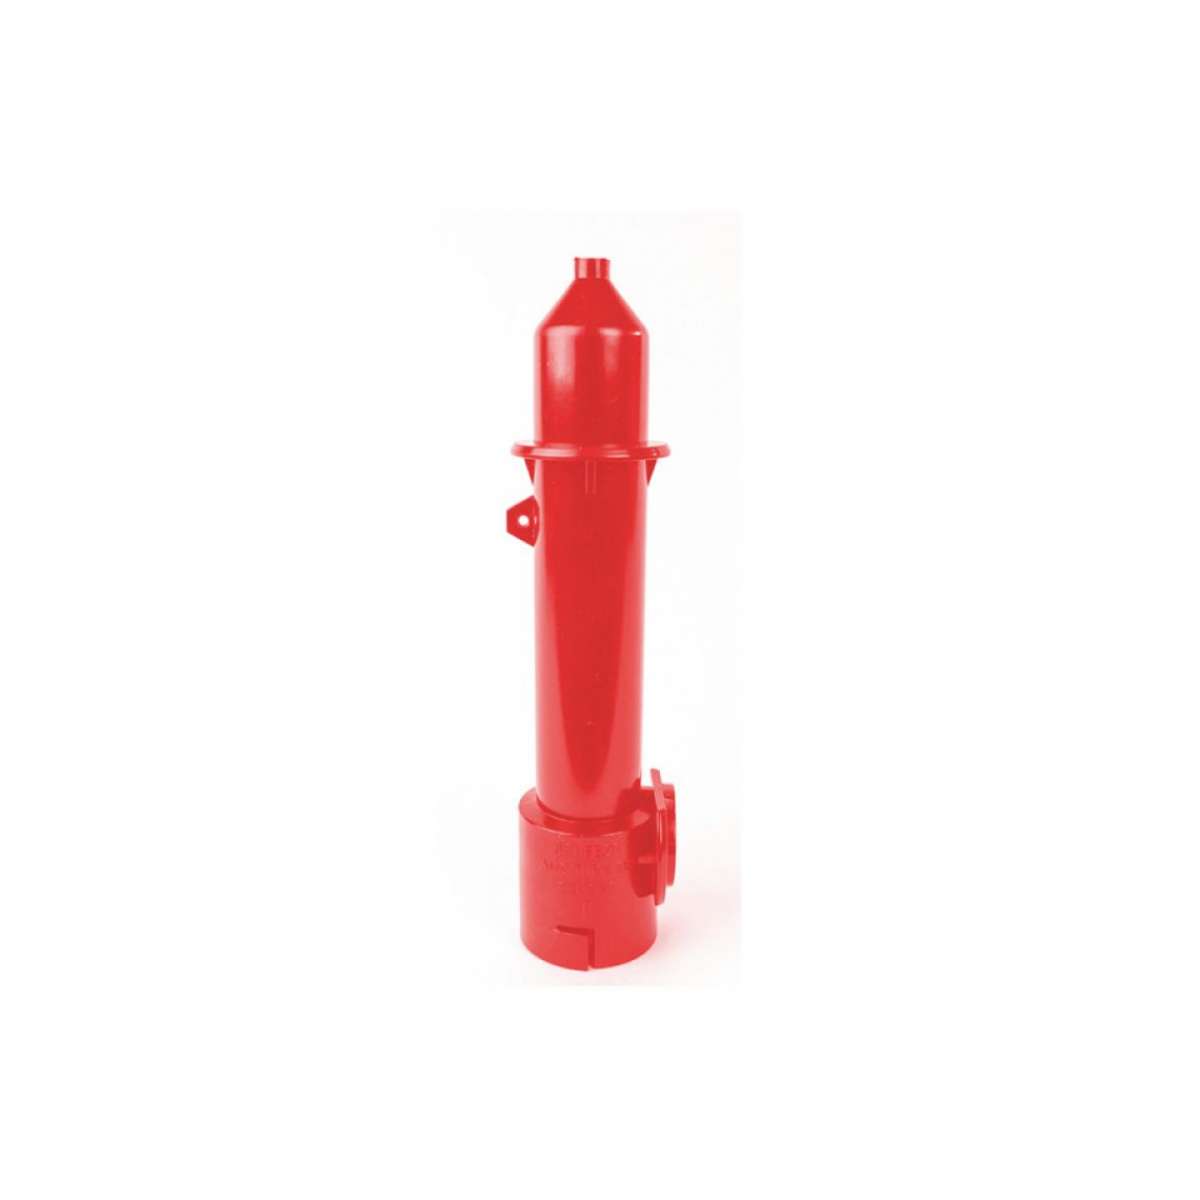 IsoLink 8" Rigid Spout with 1/4" Tip - Red